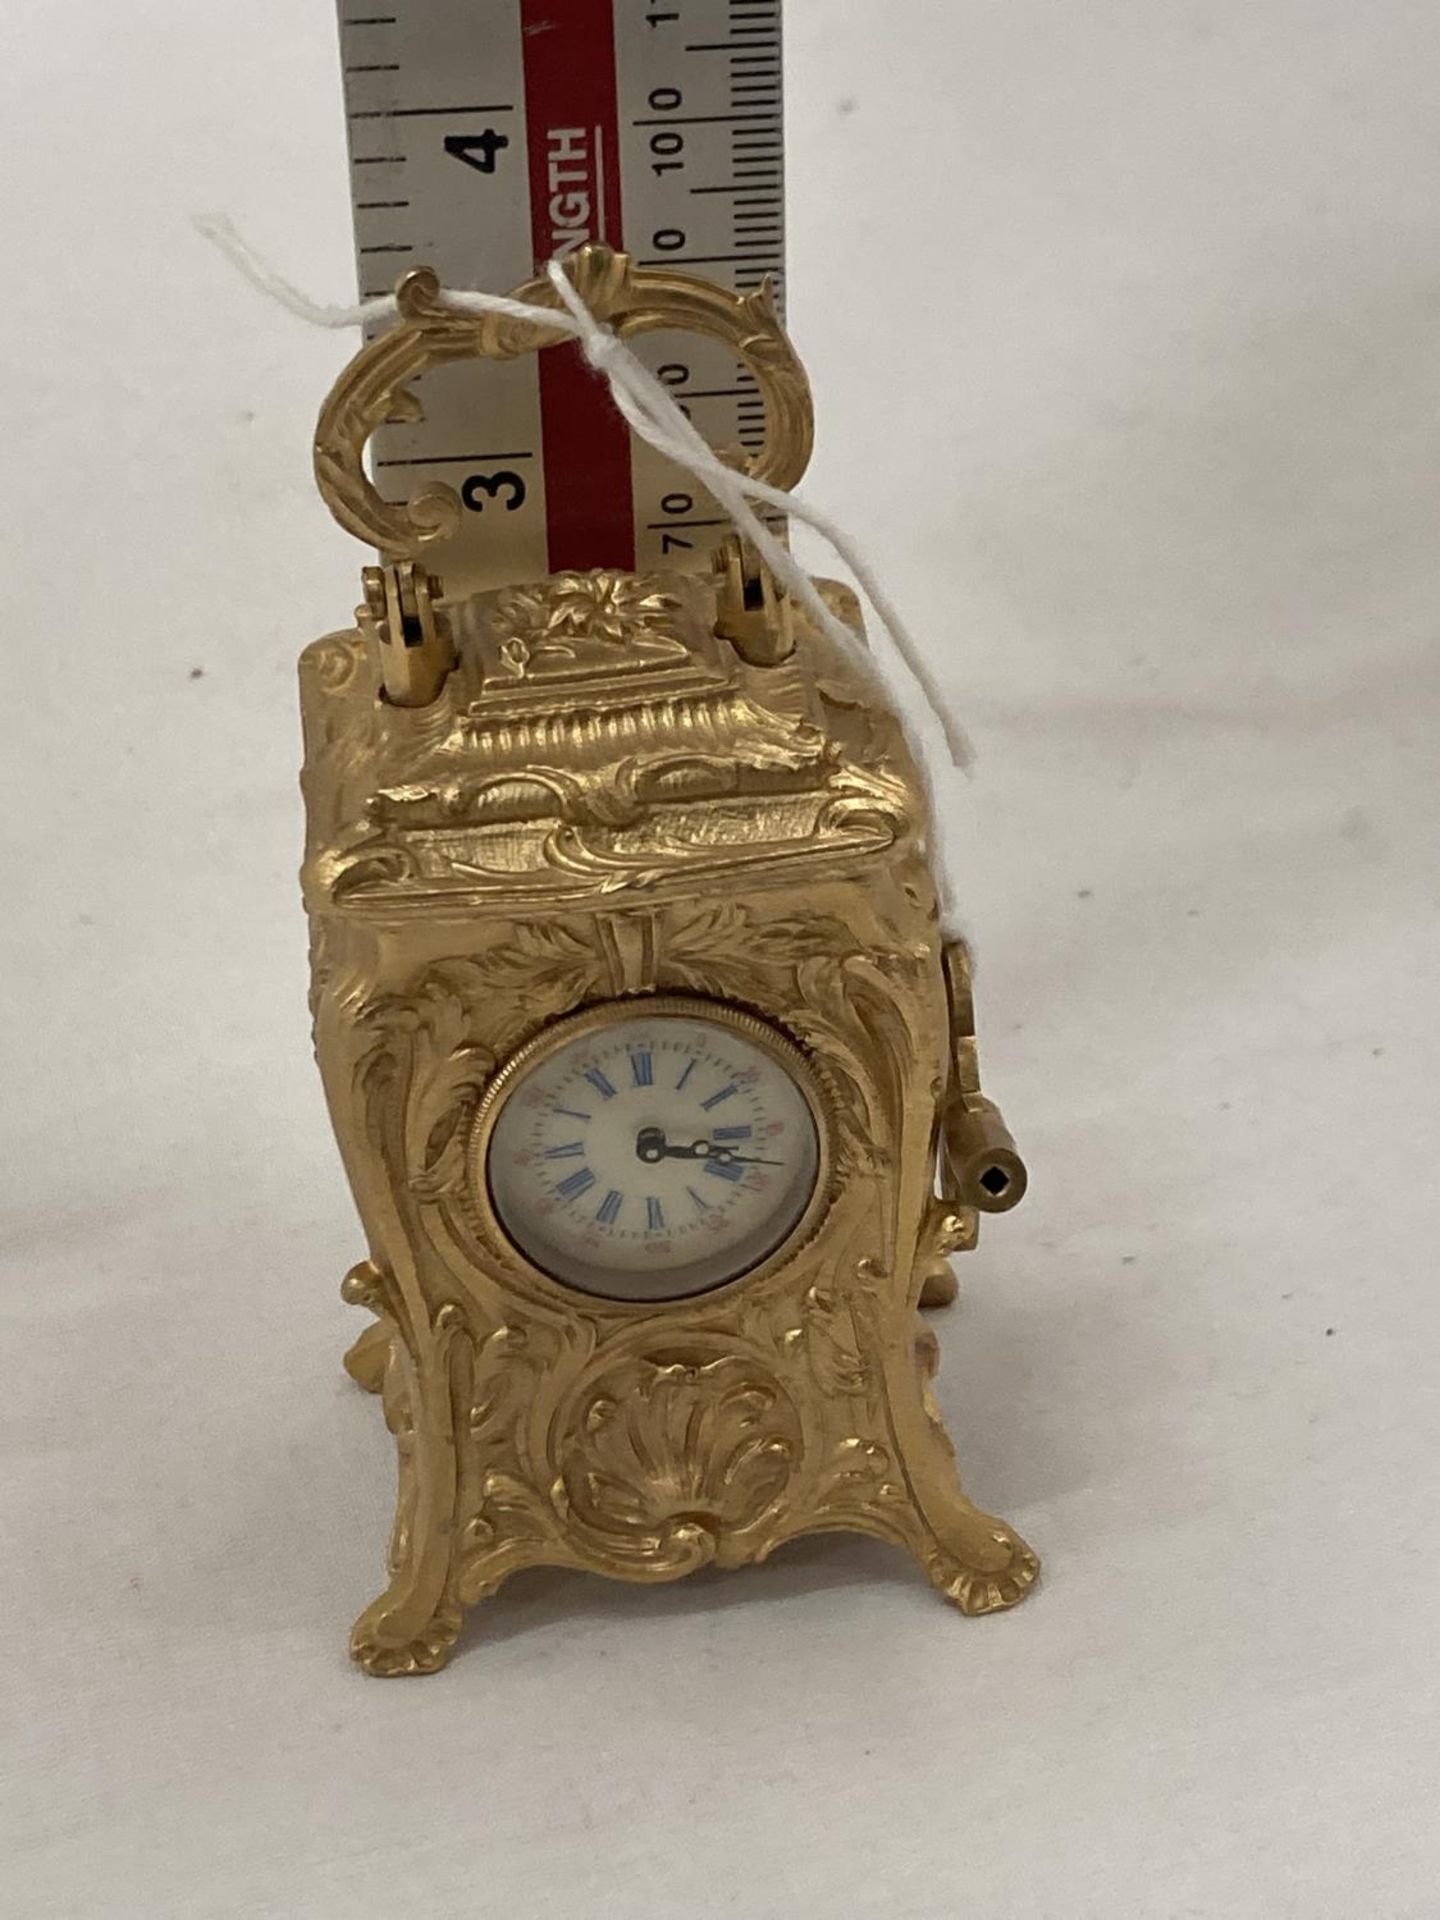 A MINIATURE GILDED FRENCH CLOCK WITH KEY HEIGHT 3.5" SEEN WORKING BUT NO WARRANTY - Image 5 of 6